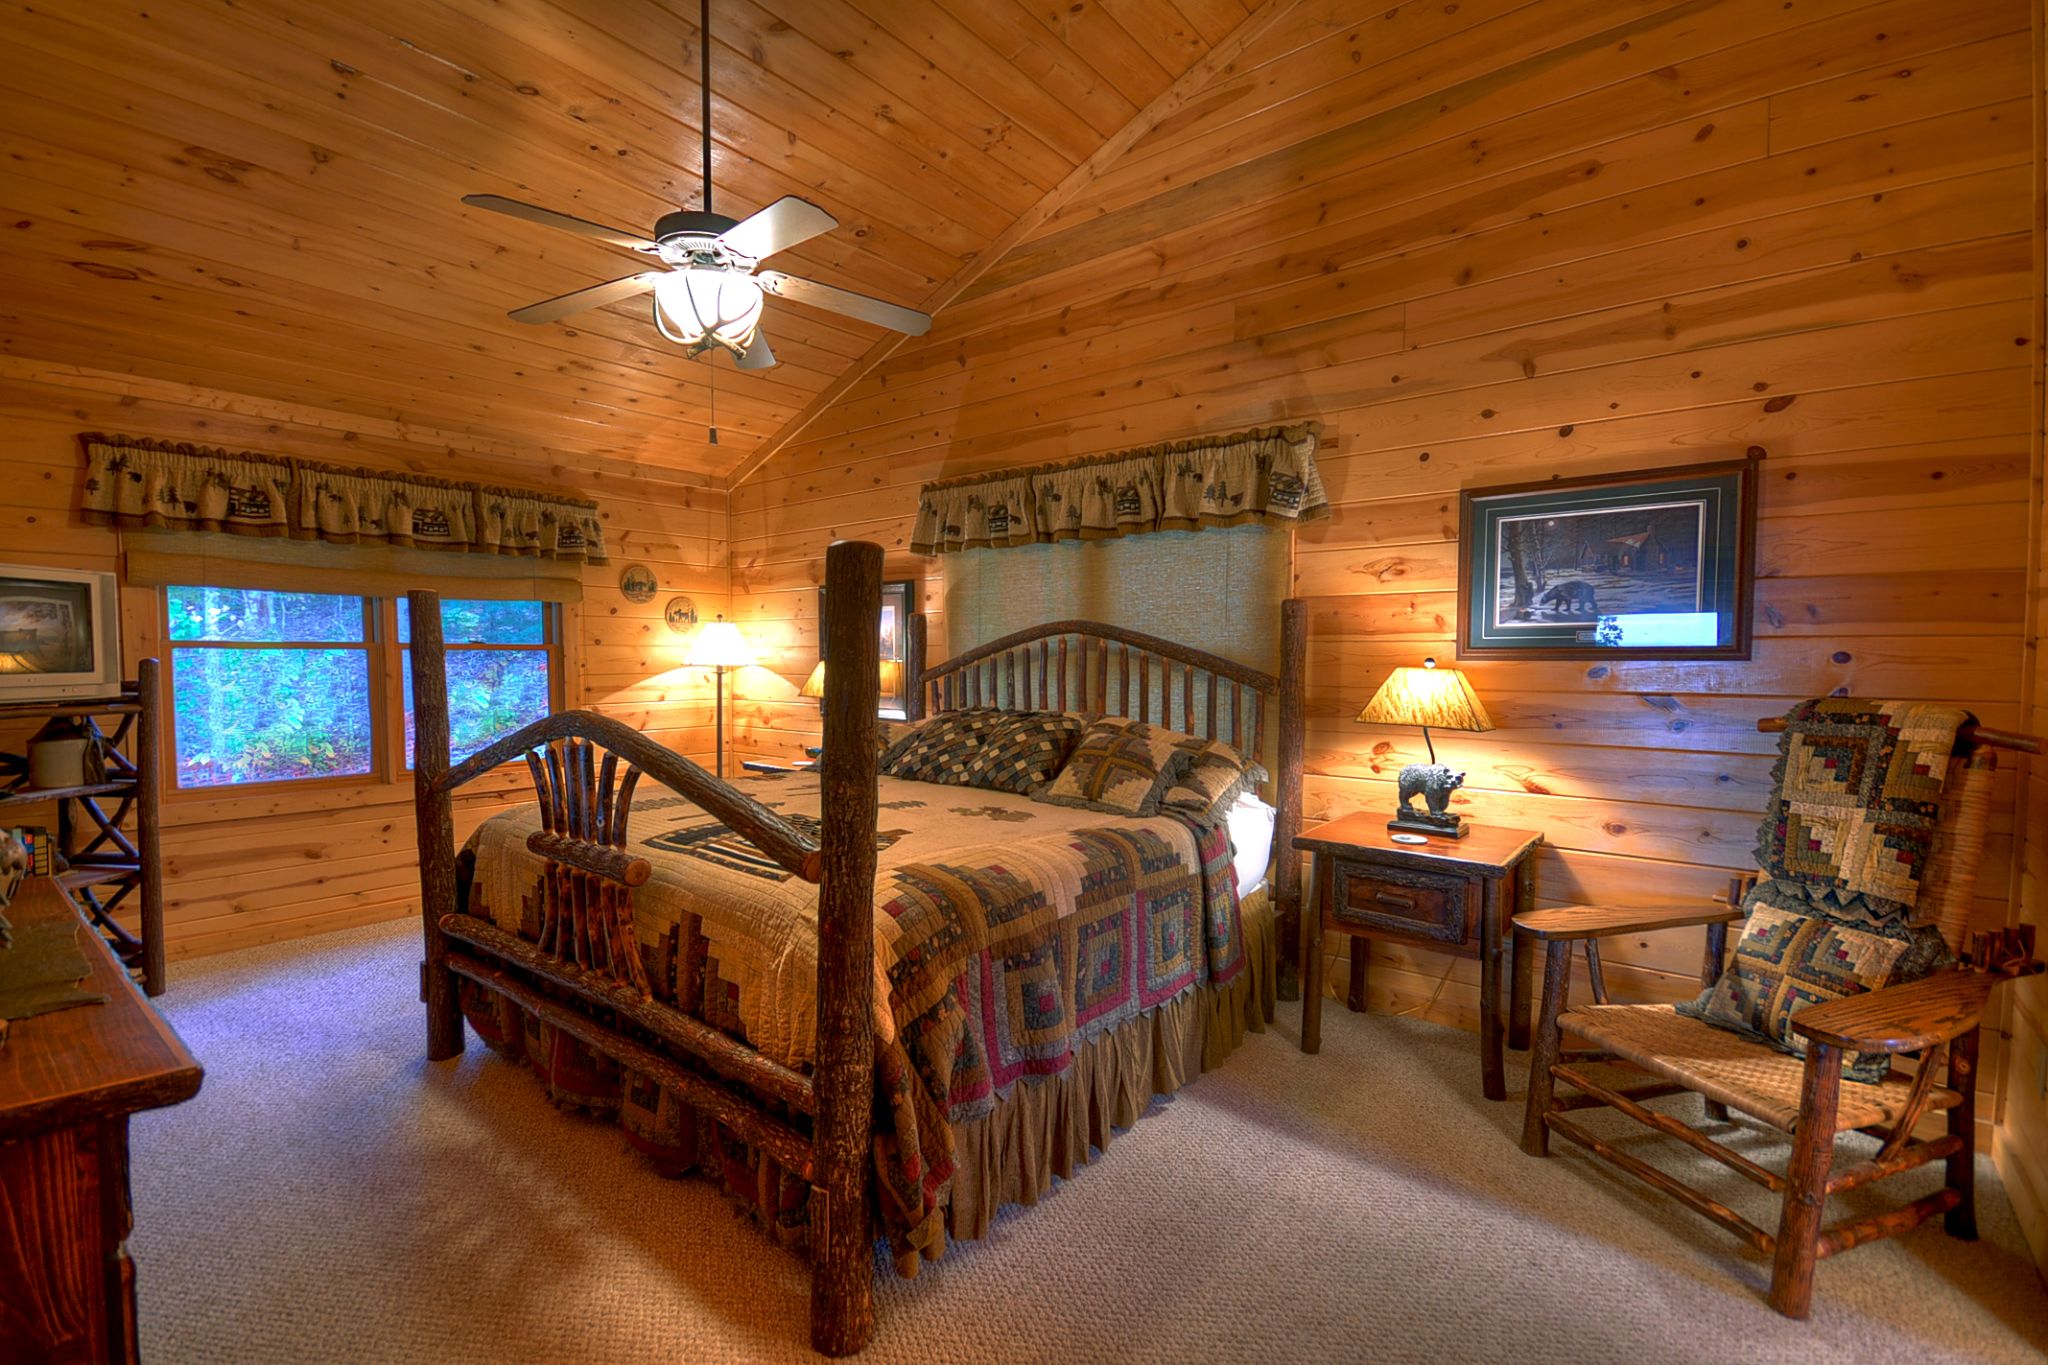 The View - Cabin Rental - A Blue Ridge Vacation | A Blue Ridge Vacation